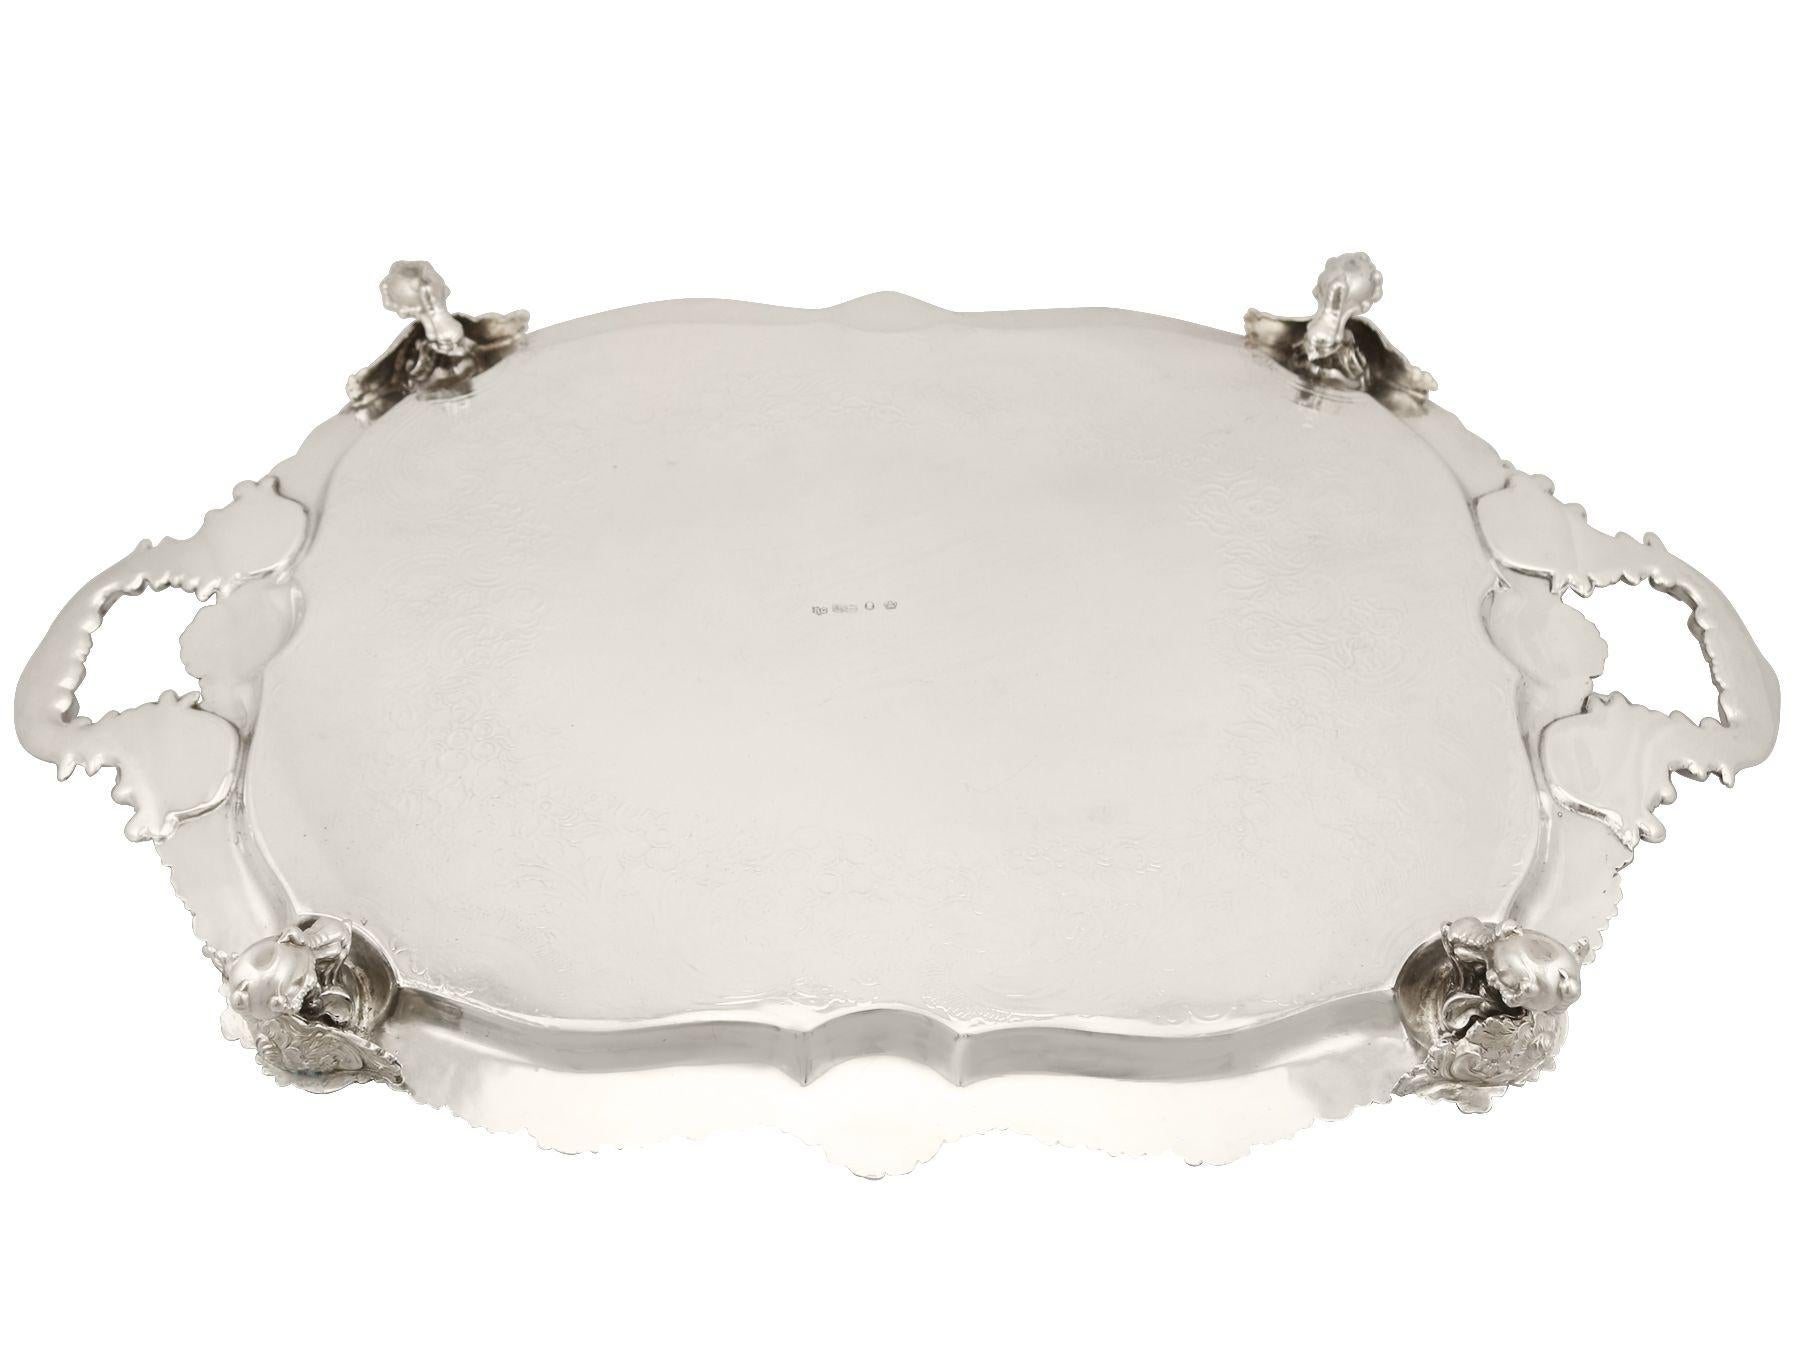 19th Century Antique Sterling Silver Tea Tray 1824 6